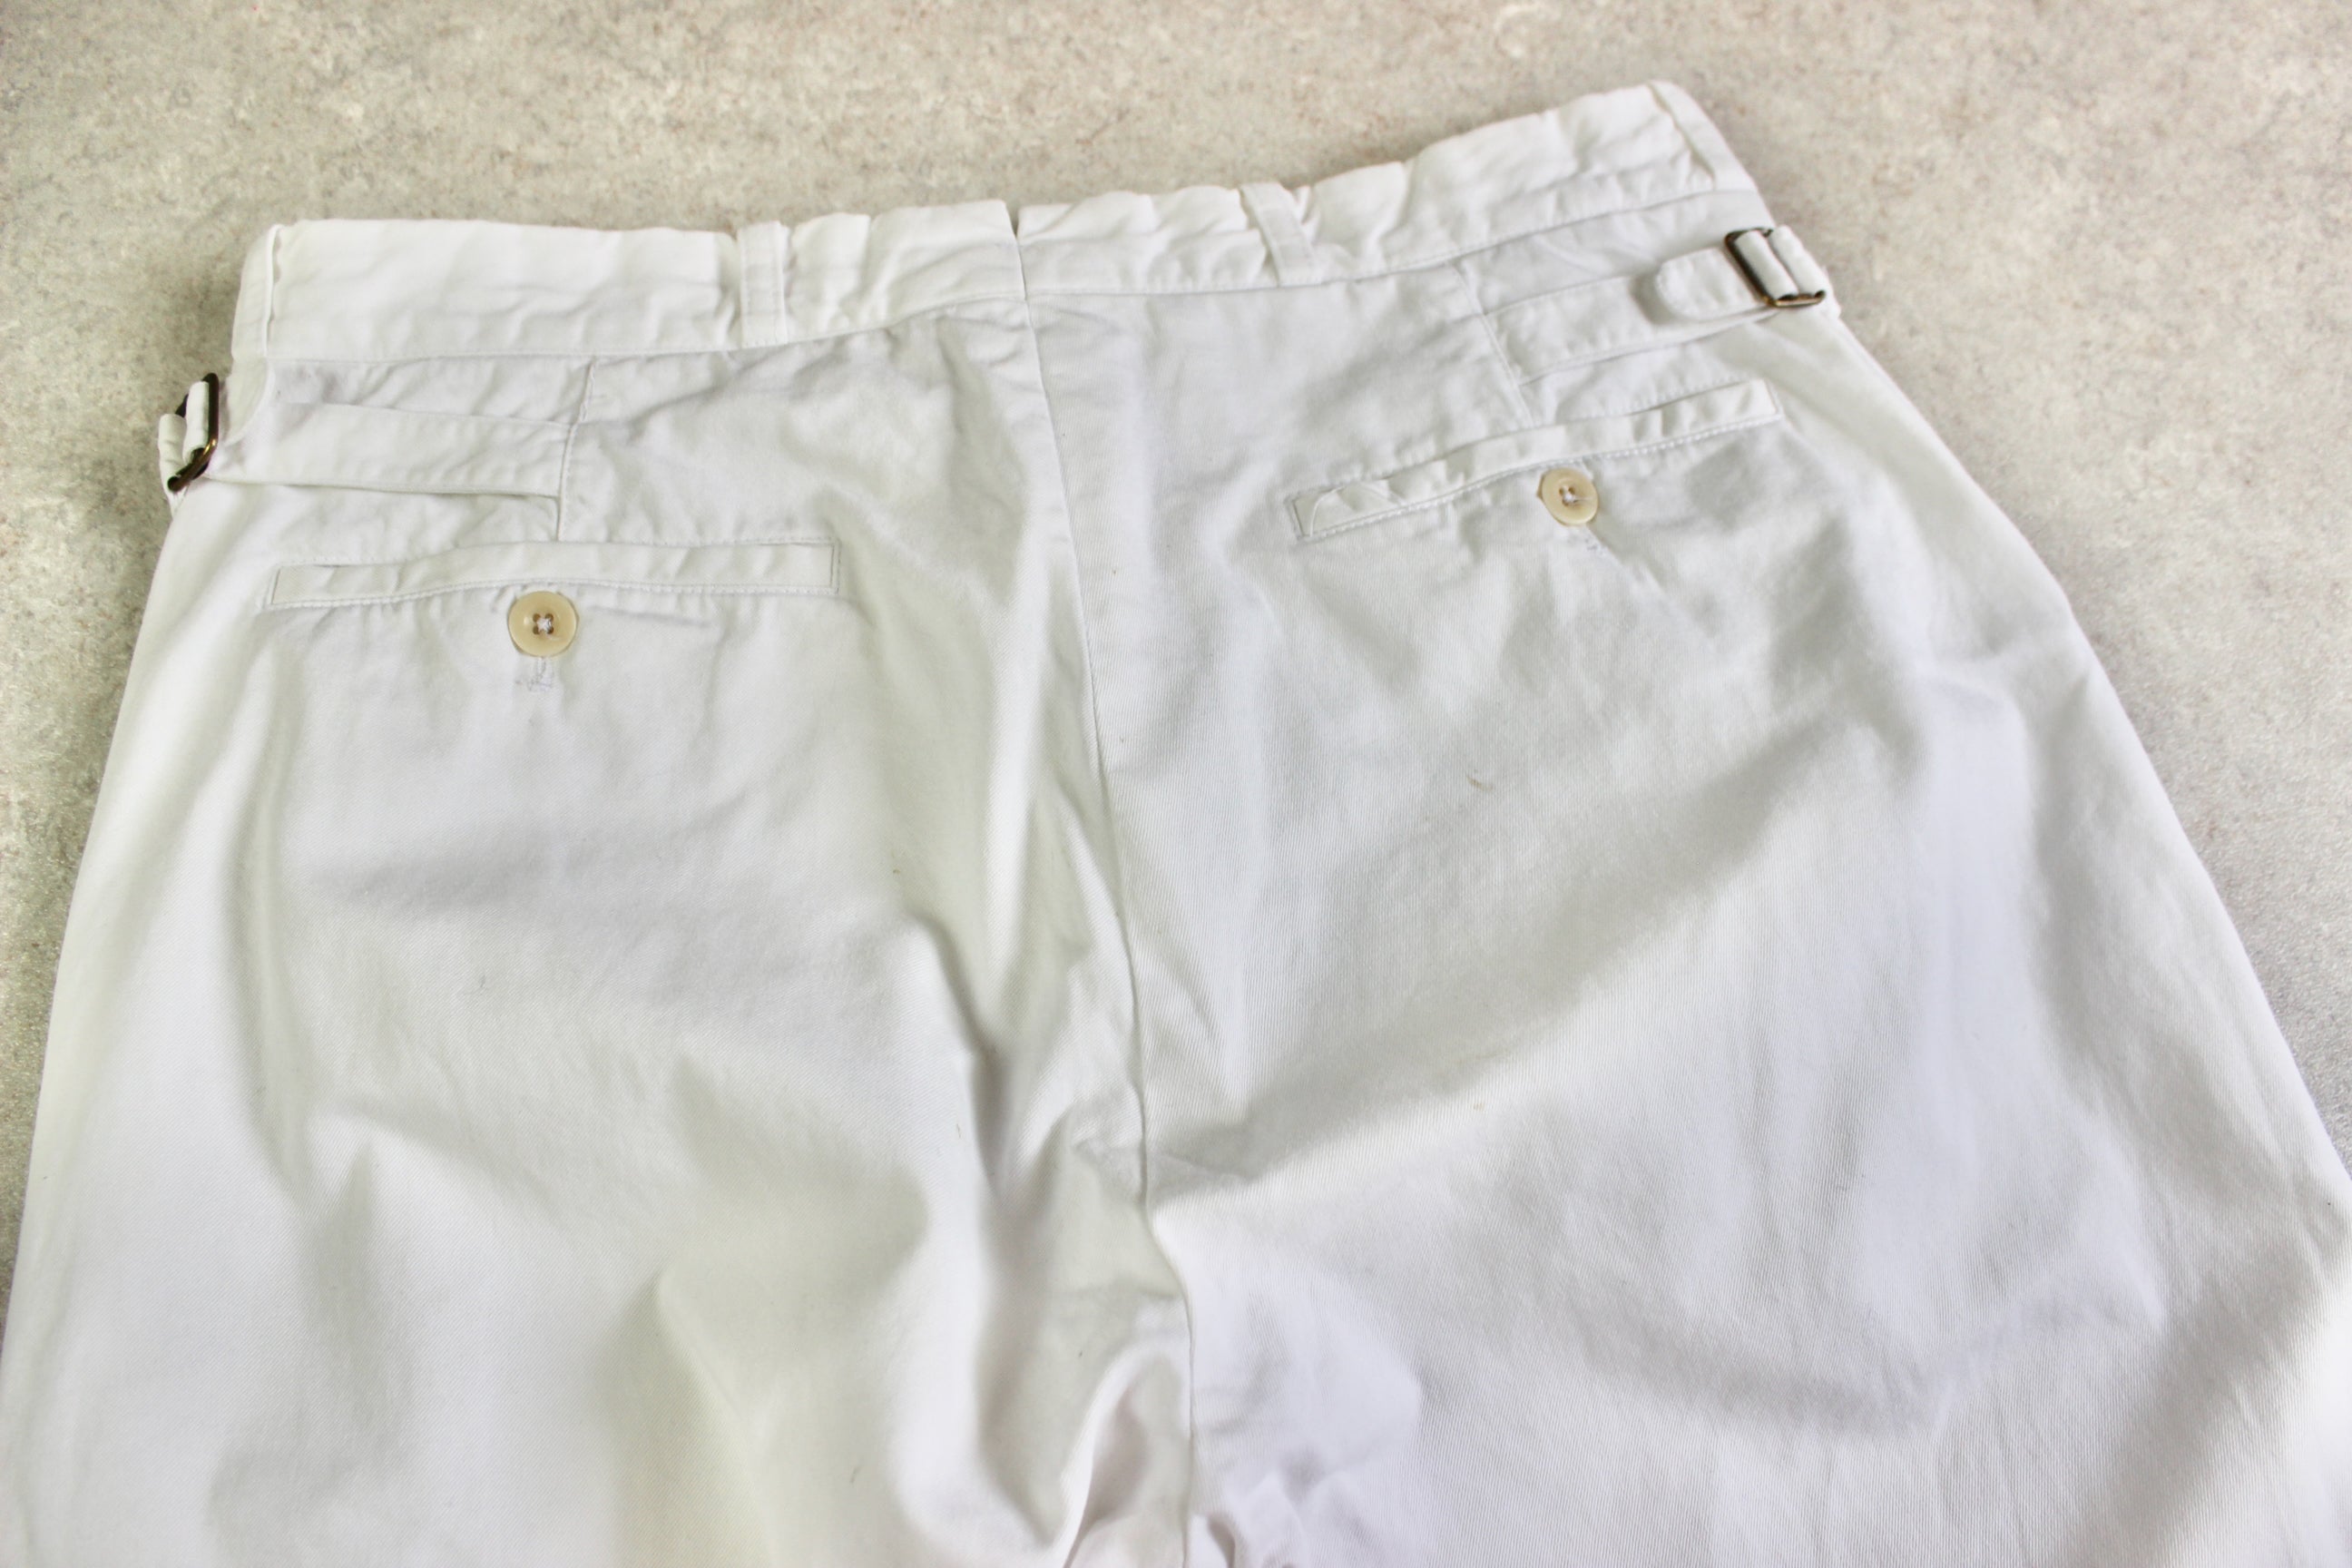 Polo Ralph Lauren - Made In Italy Chino Trousers - White - 30/32